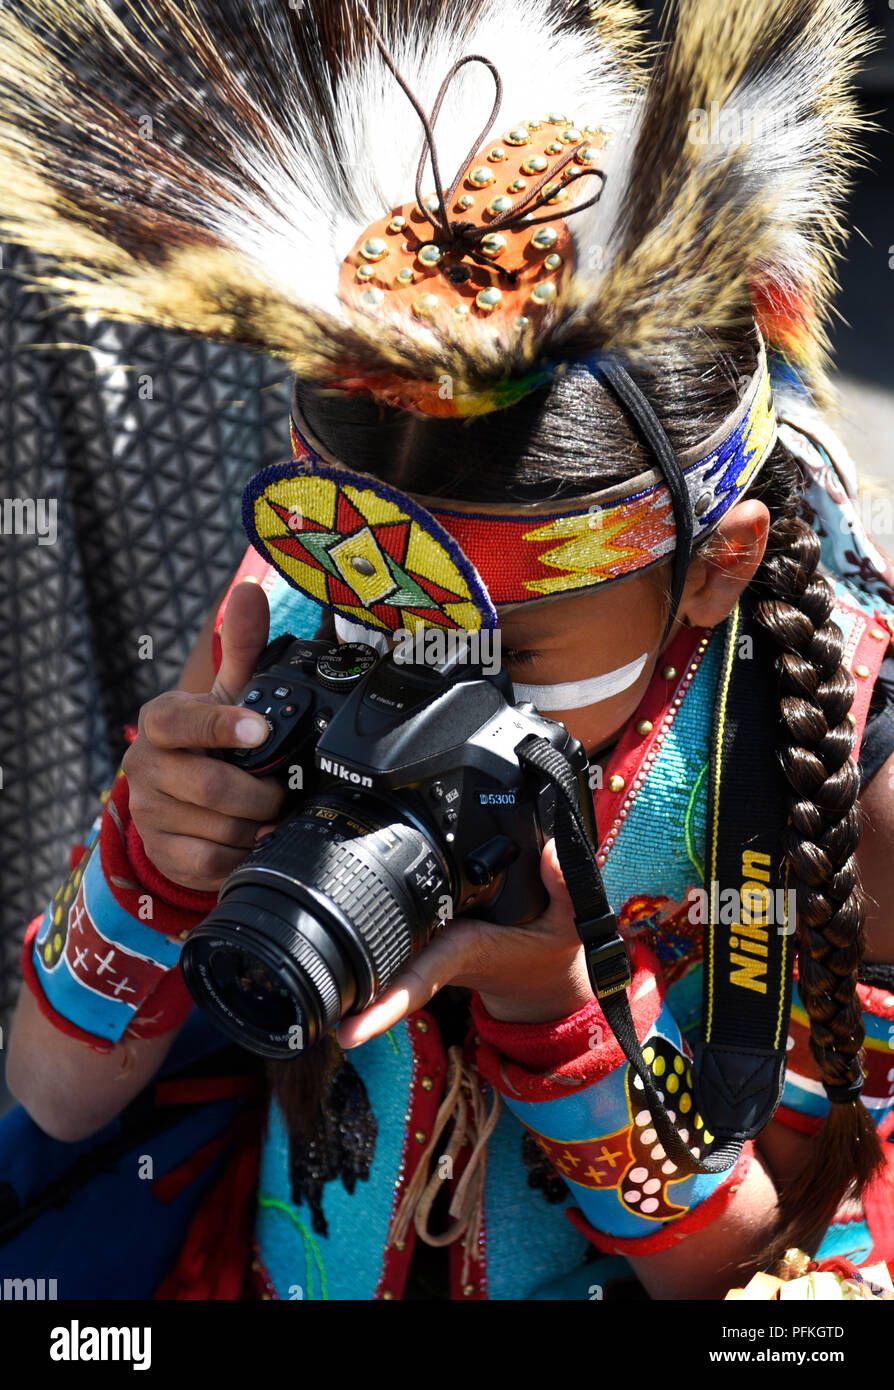 A young Native-American boy wearing traditionall Plains Indian regalia takes a picture with his Nikon camera. Stock Photo